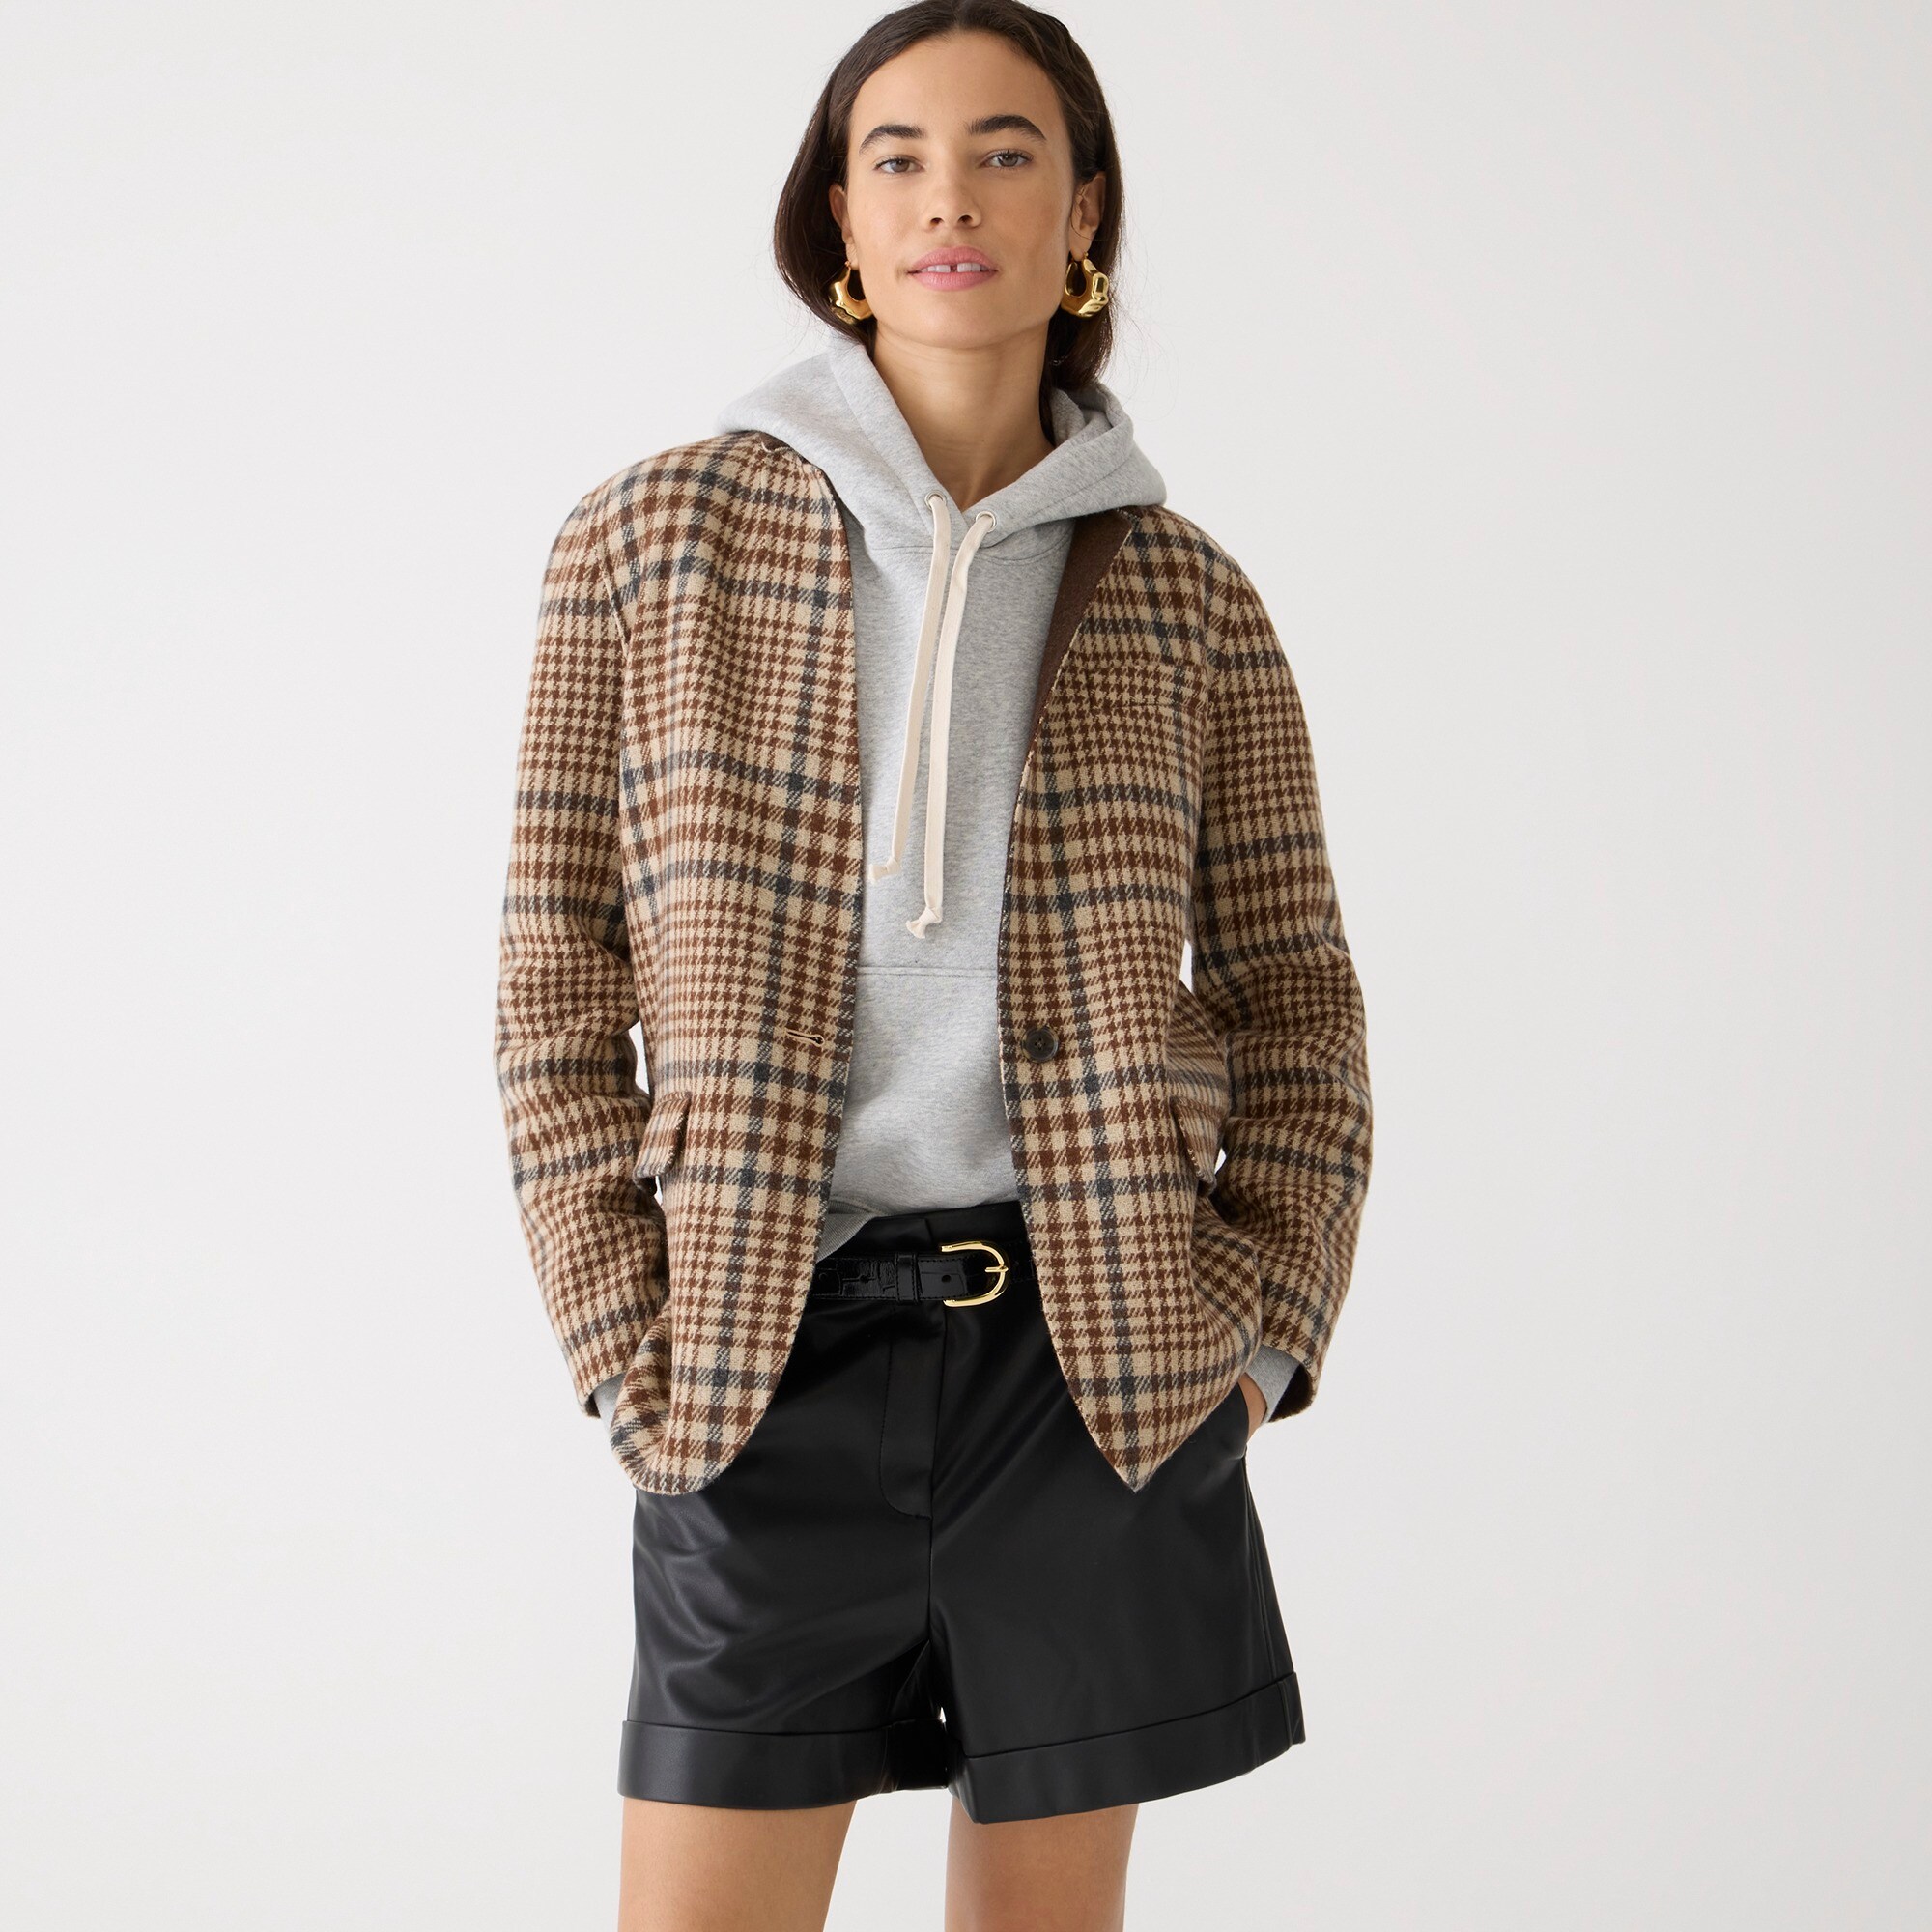  Leighton blazer-jacket in plaid double-faced wool blend